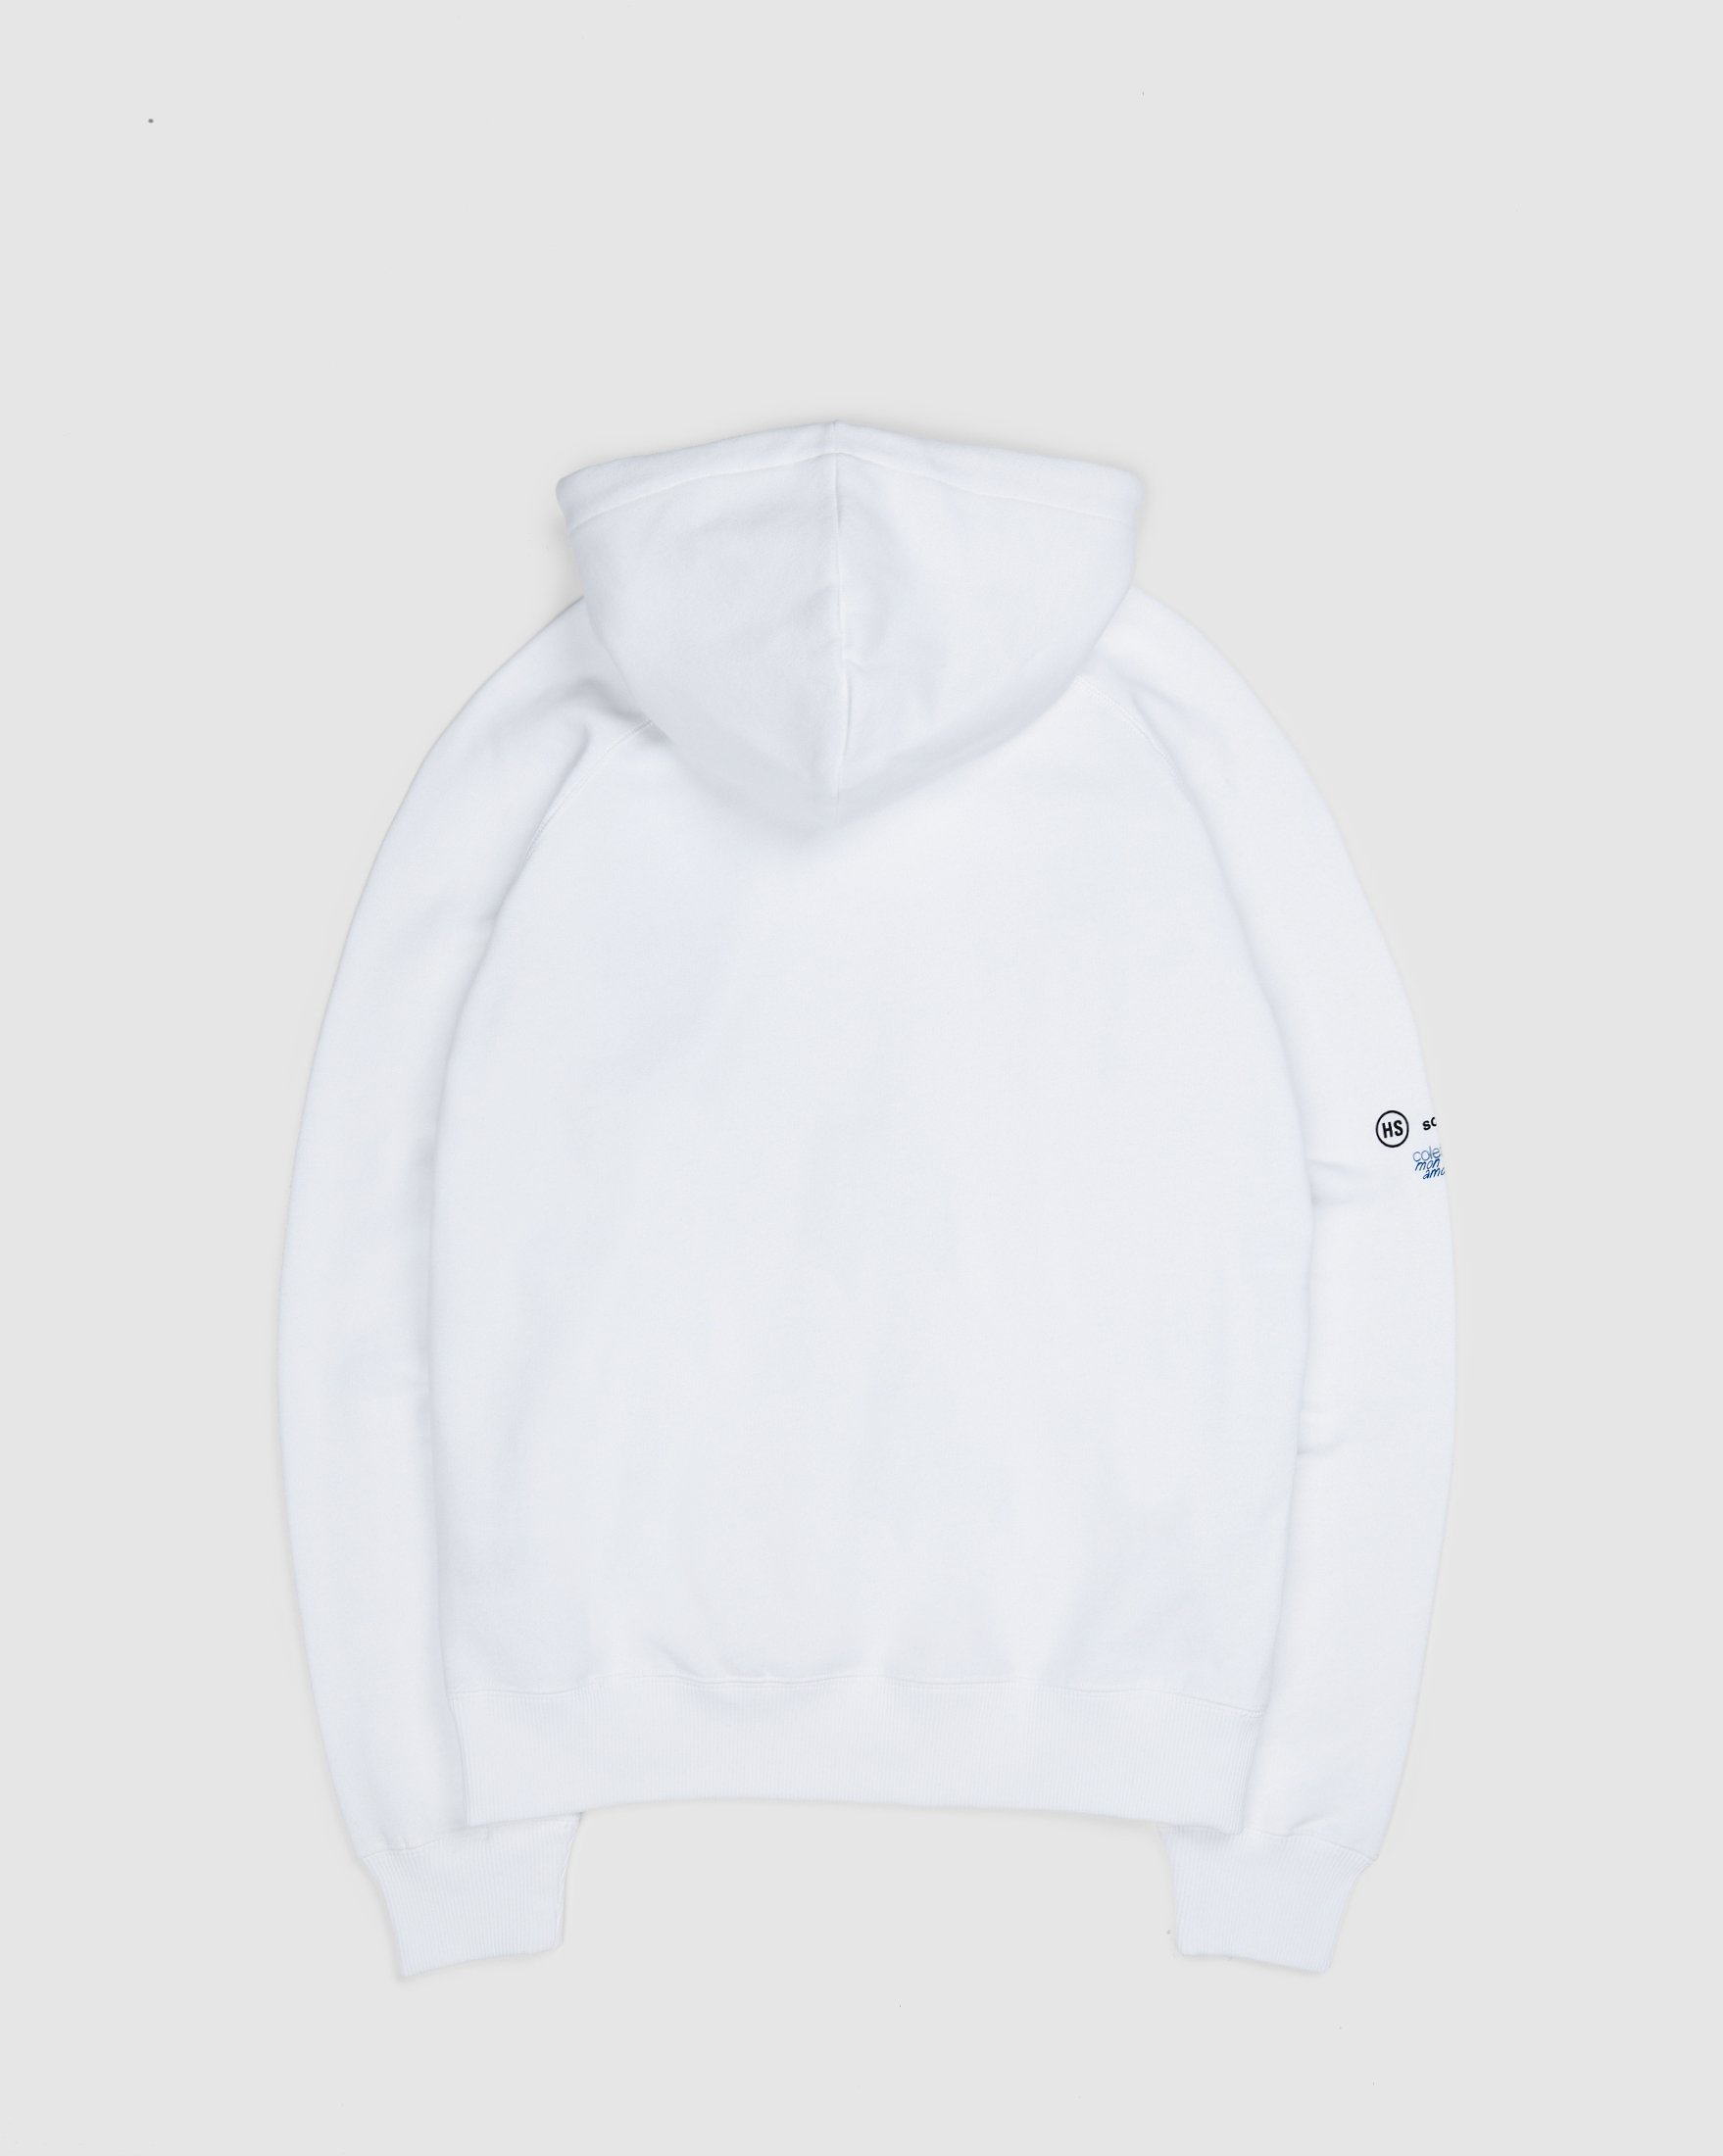 Colette Mon Amour x Soulland - Snoopy Bed White Hoodie - Clothing - White - Image 2